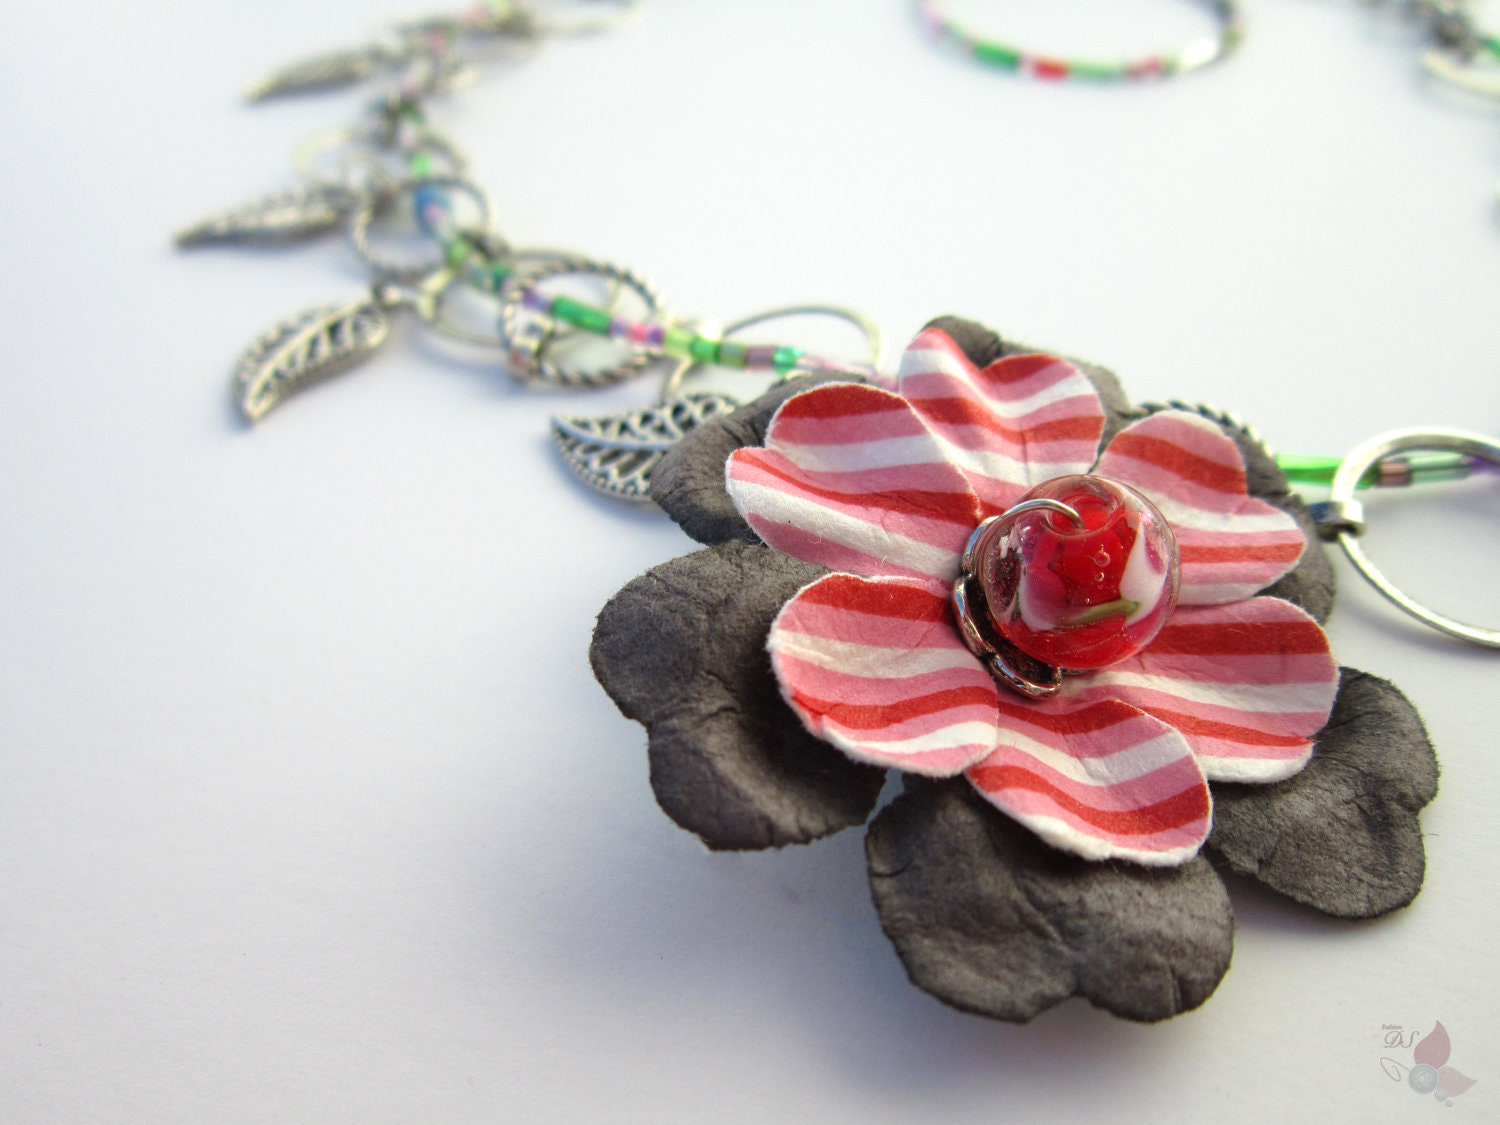 On Sale Necklace with Flower on the Side and Dangling Leaves and a Seed Bead Thread